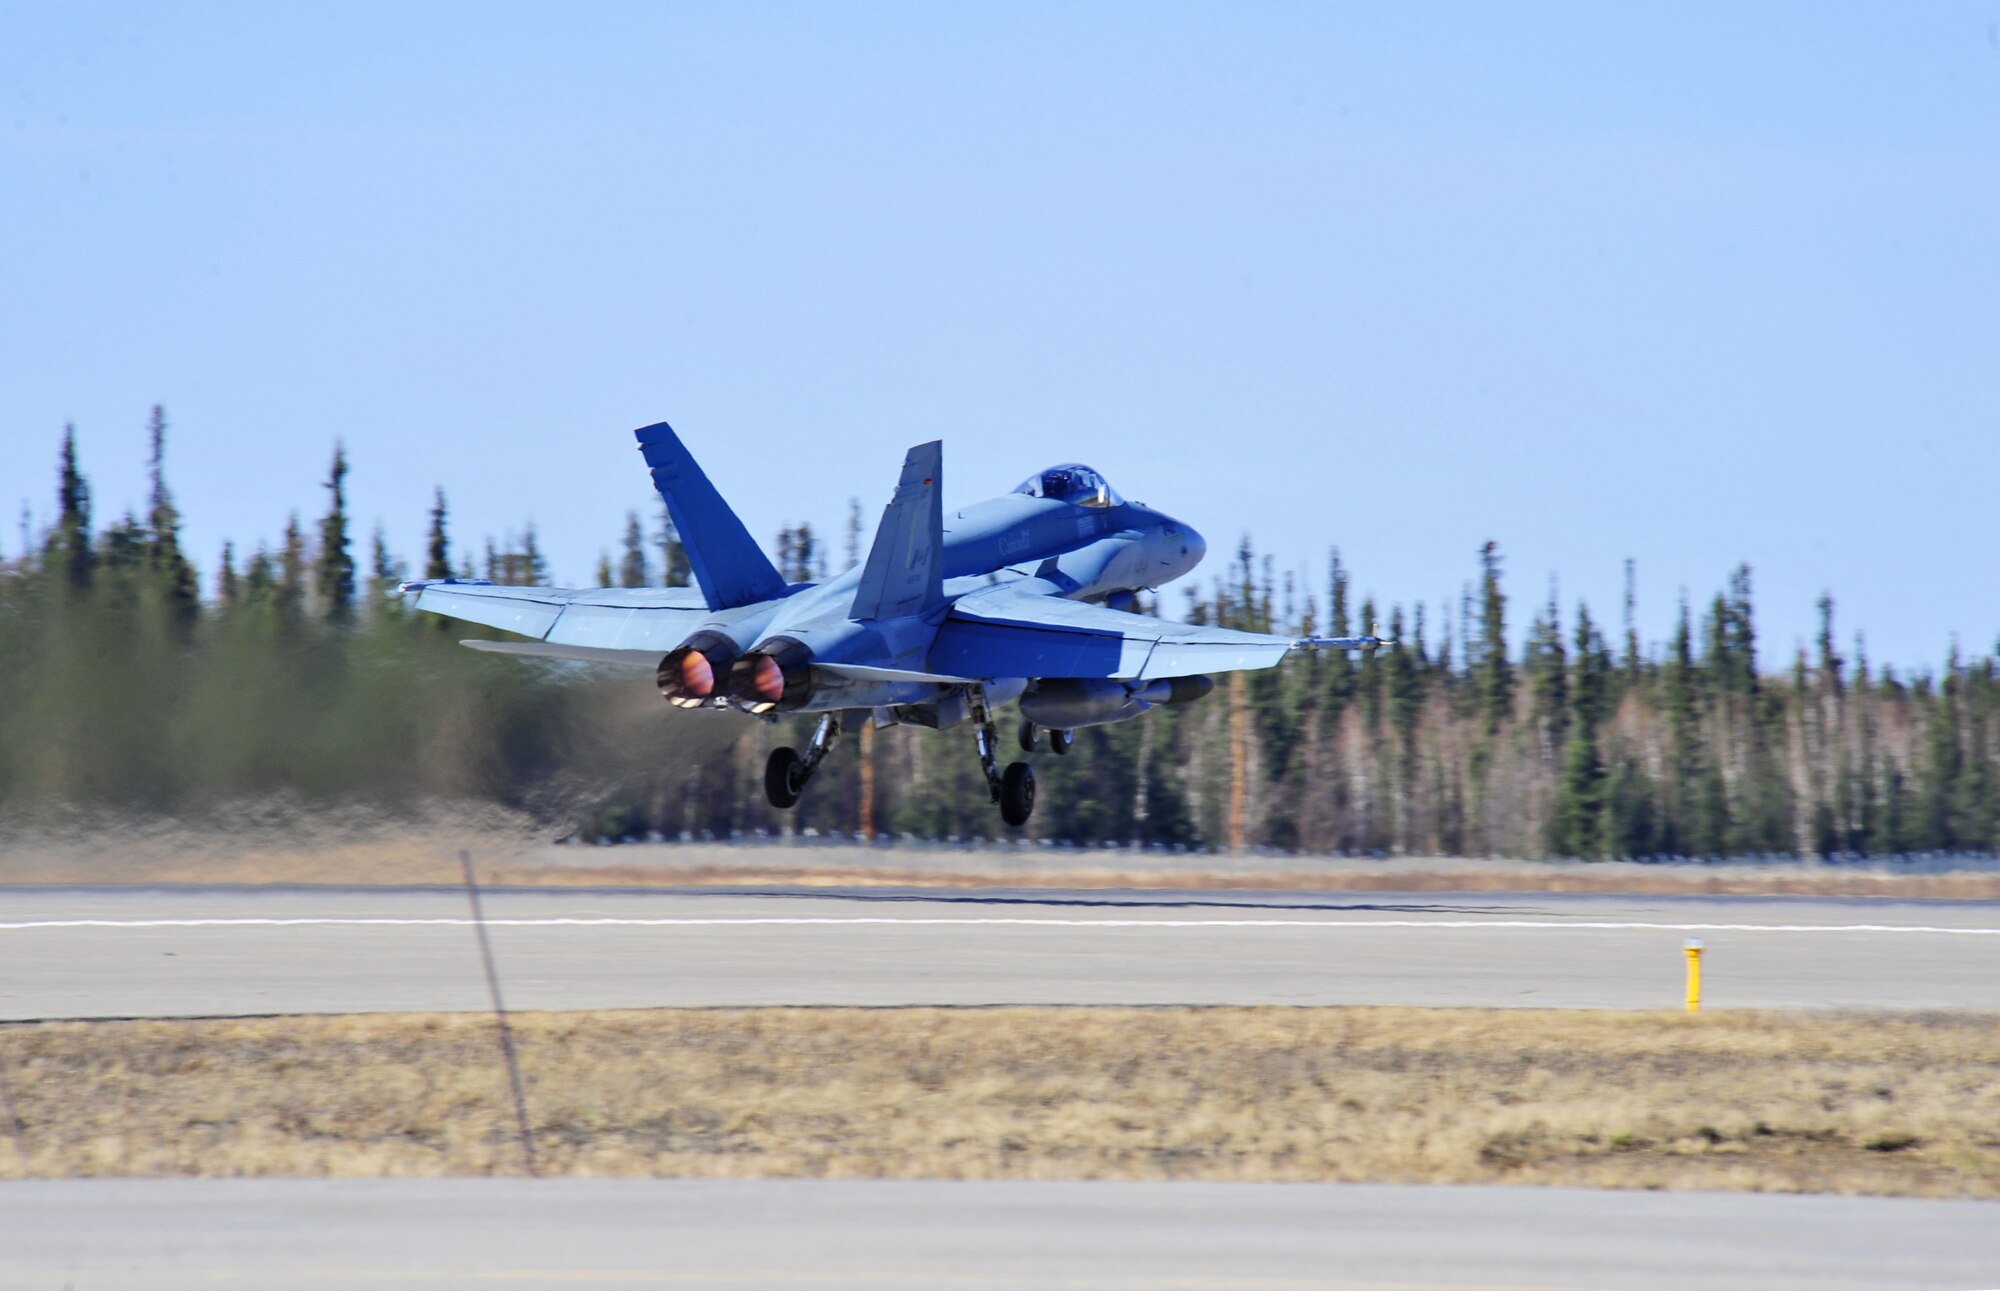 A CF-18 Hornet aircraft assigned to the Royal Canadian Air Force's 425th Tactical Fighter Squadron takes off for an afternoon mission April 28, 2015, during Distant Frontier at Eielson Air Force Base, Alaska.  Distant Frontier is a preparation period during which RED FLAG-Alaska participants familiarize themselves with the airspace. (U.S. Air Force photo by Tech. Sgt. Miguel Lara III/Released)